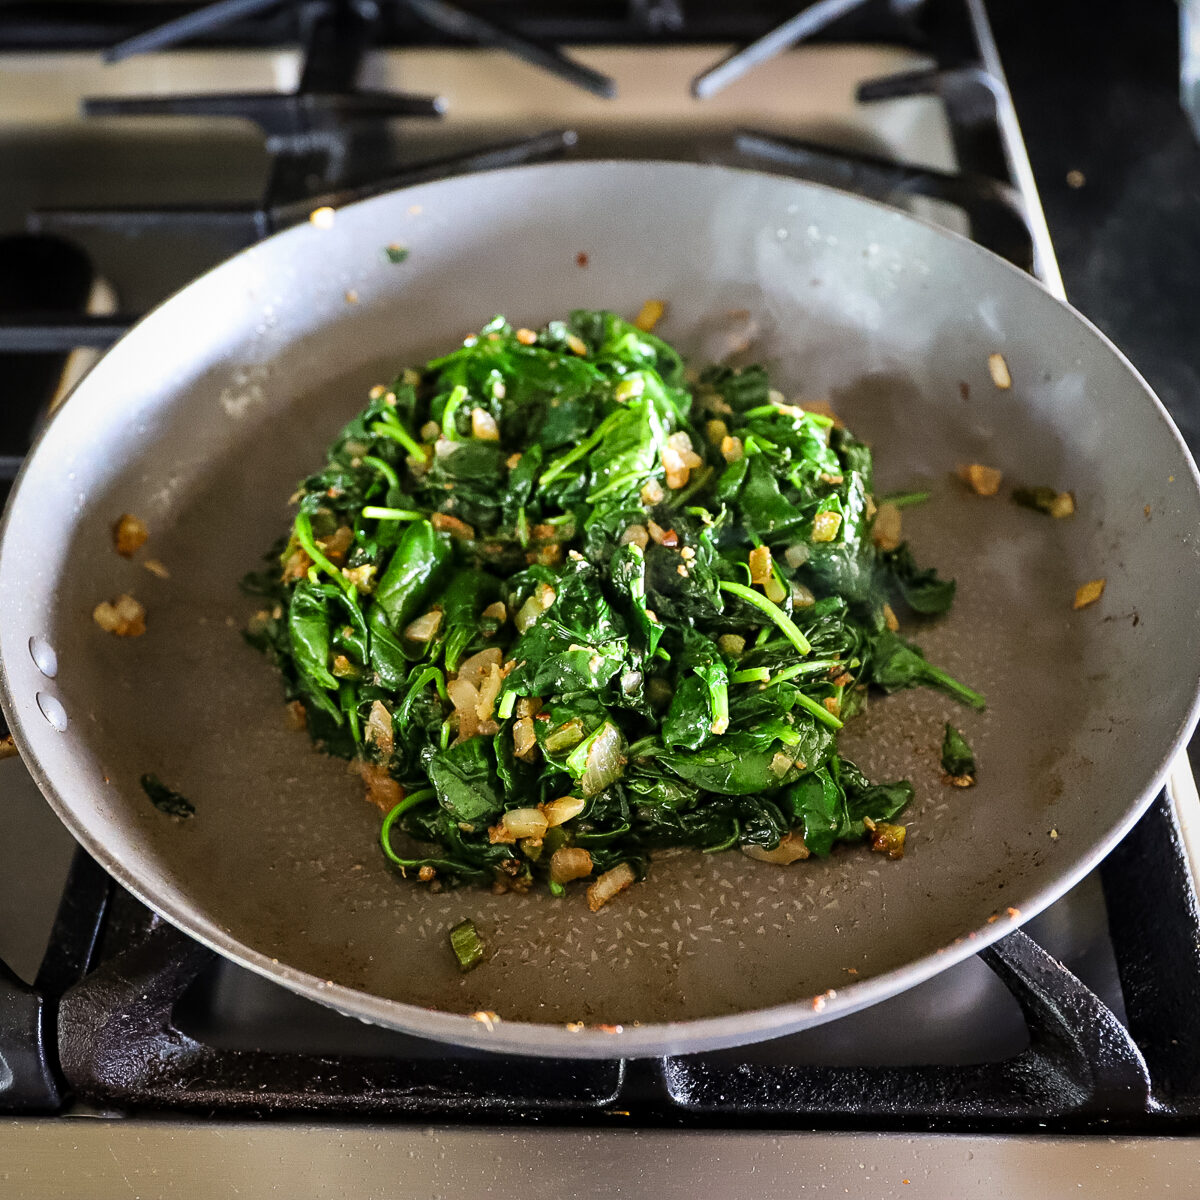 The spinach is all cooked and has shrunk down to a small percentage of it's original size. The bright green palak is piled in the center of the pan.